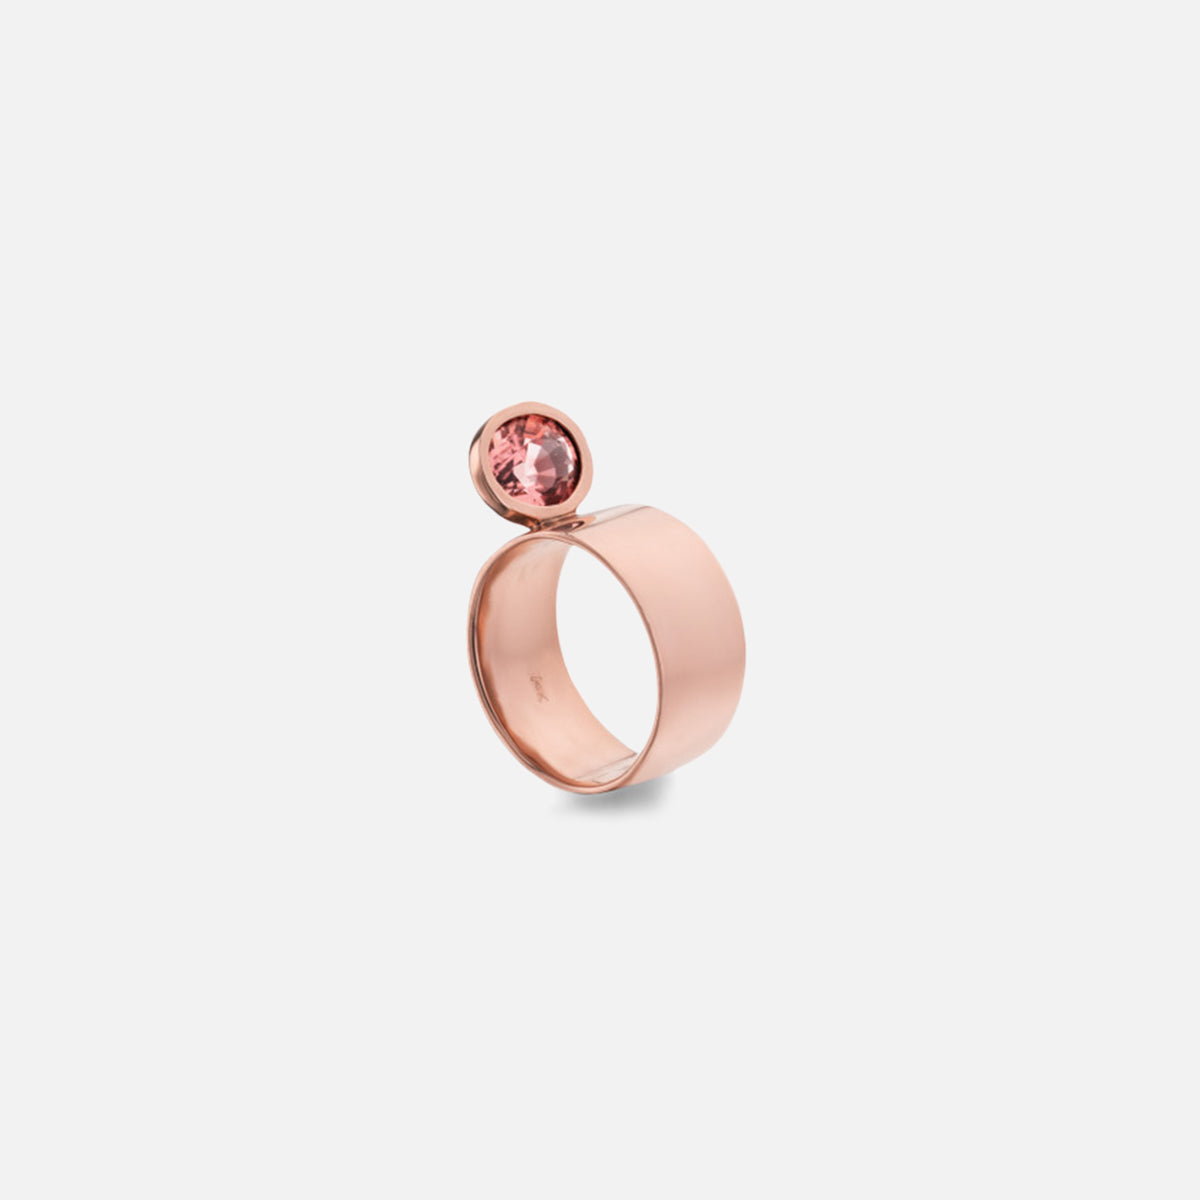 Perched Setting Ring with Oval Pink Tourmaline